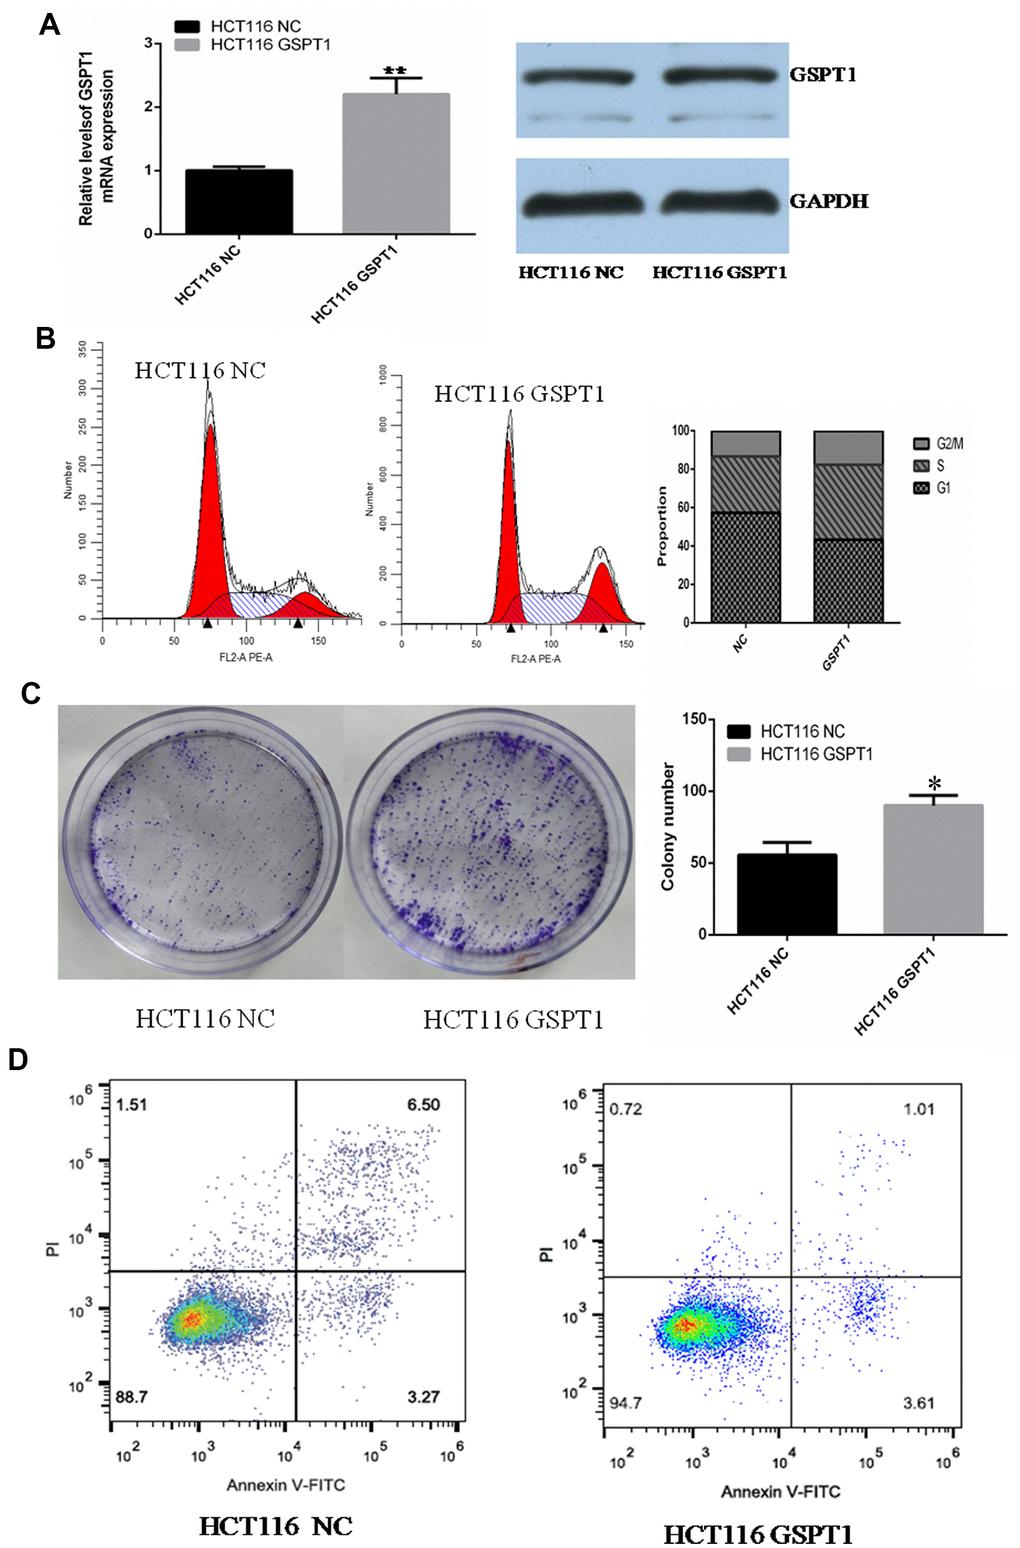 Over-expression of GSPT1 promotes cell cycle progression and inhibits apoptosis in colon cancer cells. (A) Quantitative PCR and WB were used to detect the over-expression efficiency of GSPT1 in colon cancer cell line HCT116. (B) Over-expression GSPT1 promotes cell cycle of colon cancer cell line HCT116. (C) Over-expression of GSPT1 promotes the cloning ability of colon cancer cell line HCT116. (D) Over-expression of GSPT1 inhibits the apoptosis of colon cancer cell line HCT116. * P P 